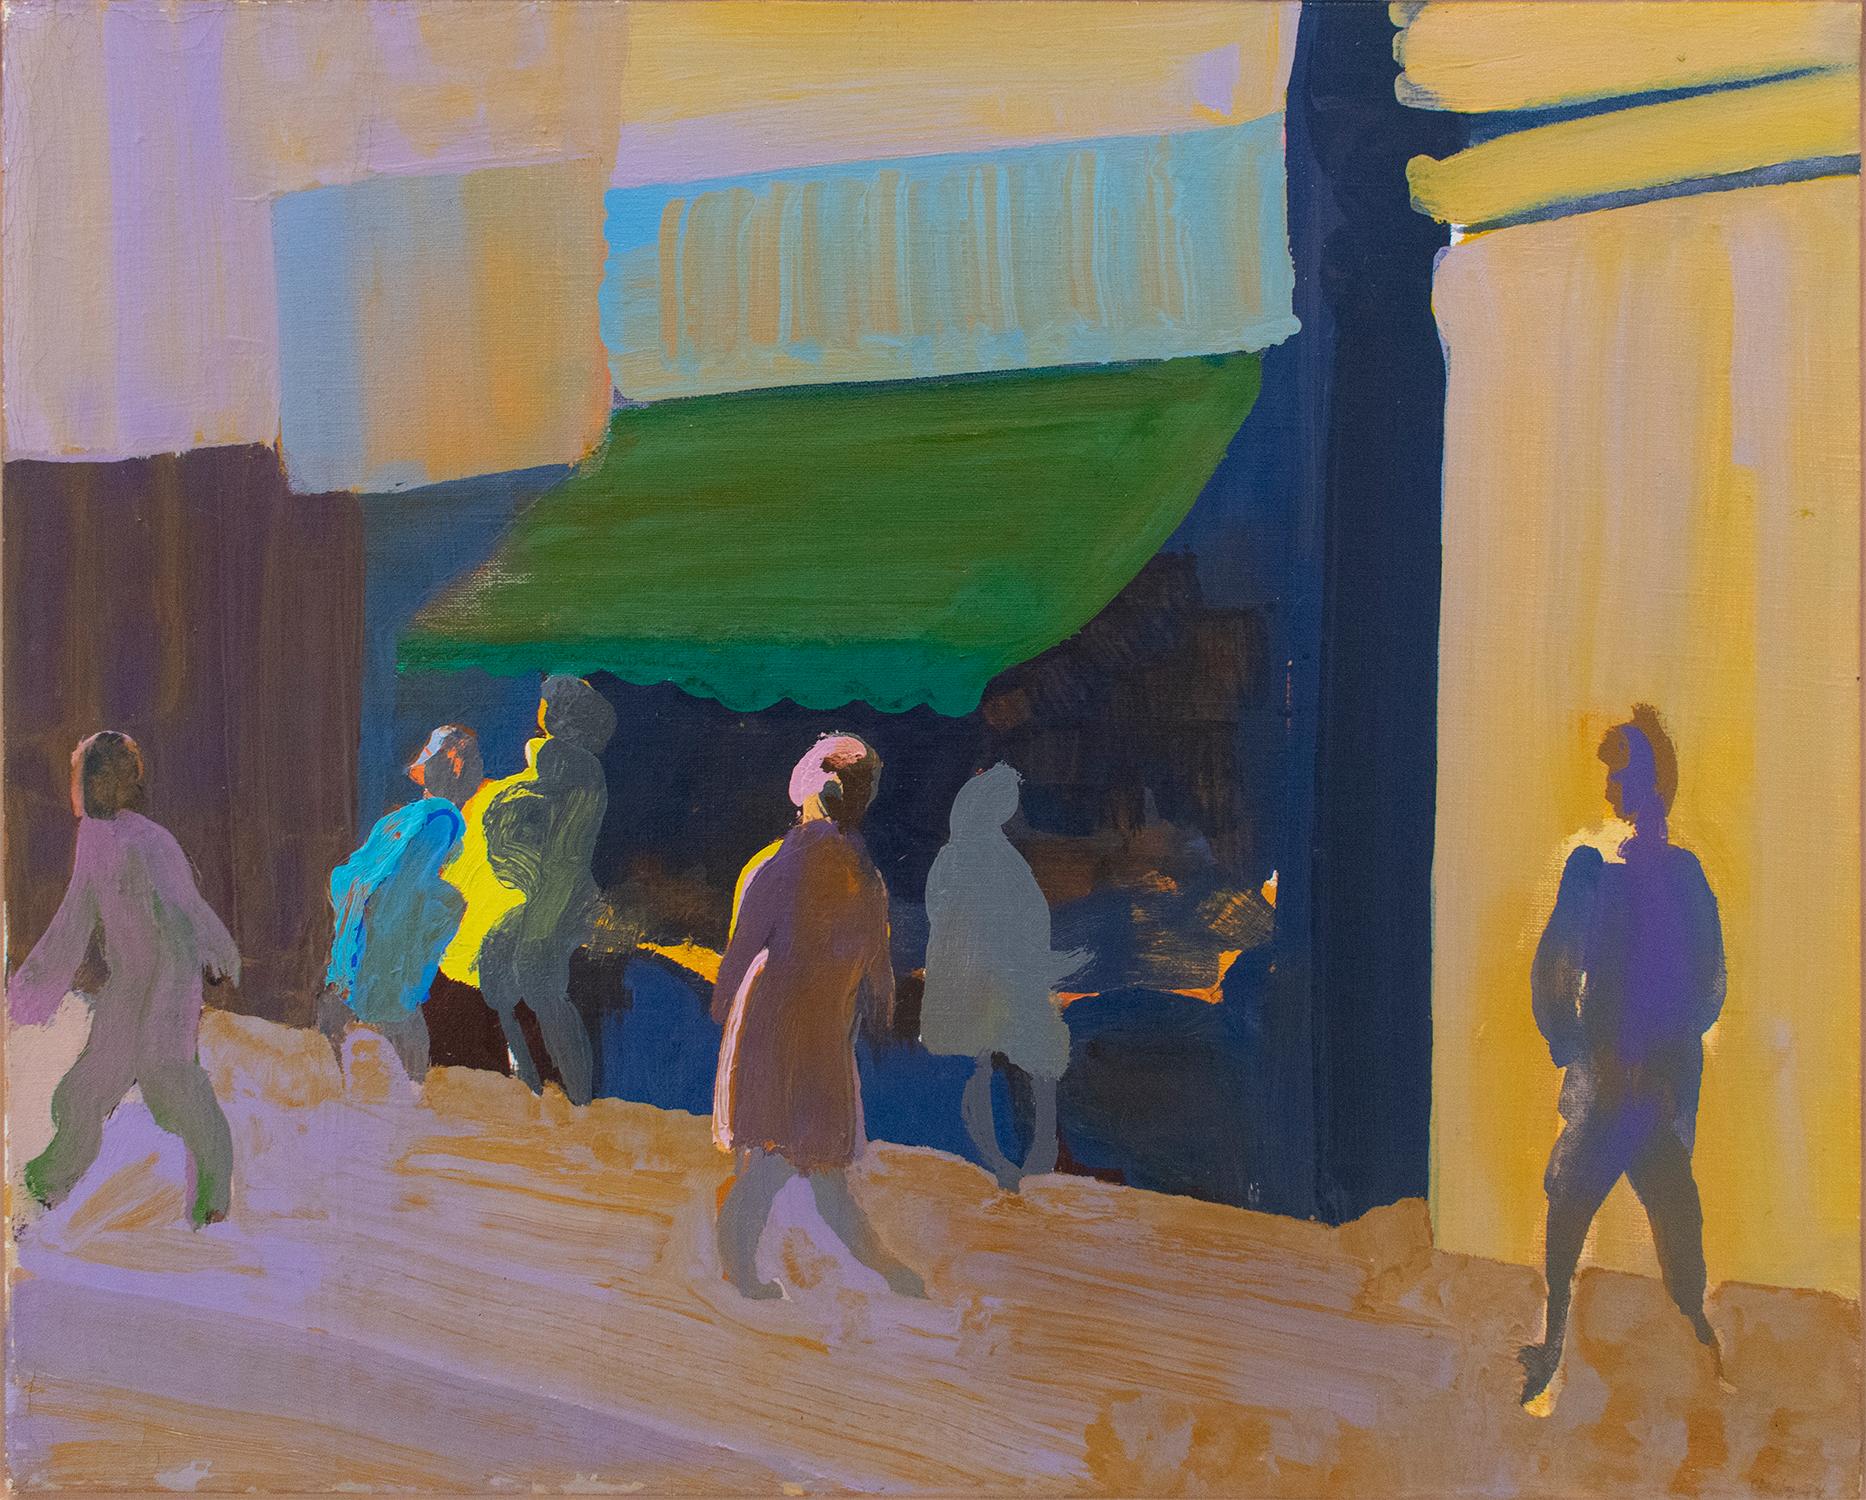 Street Shopping (Impressionistic 1970s New York Cityscape by William Clutz)